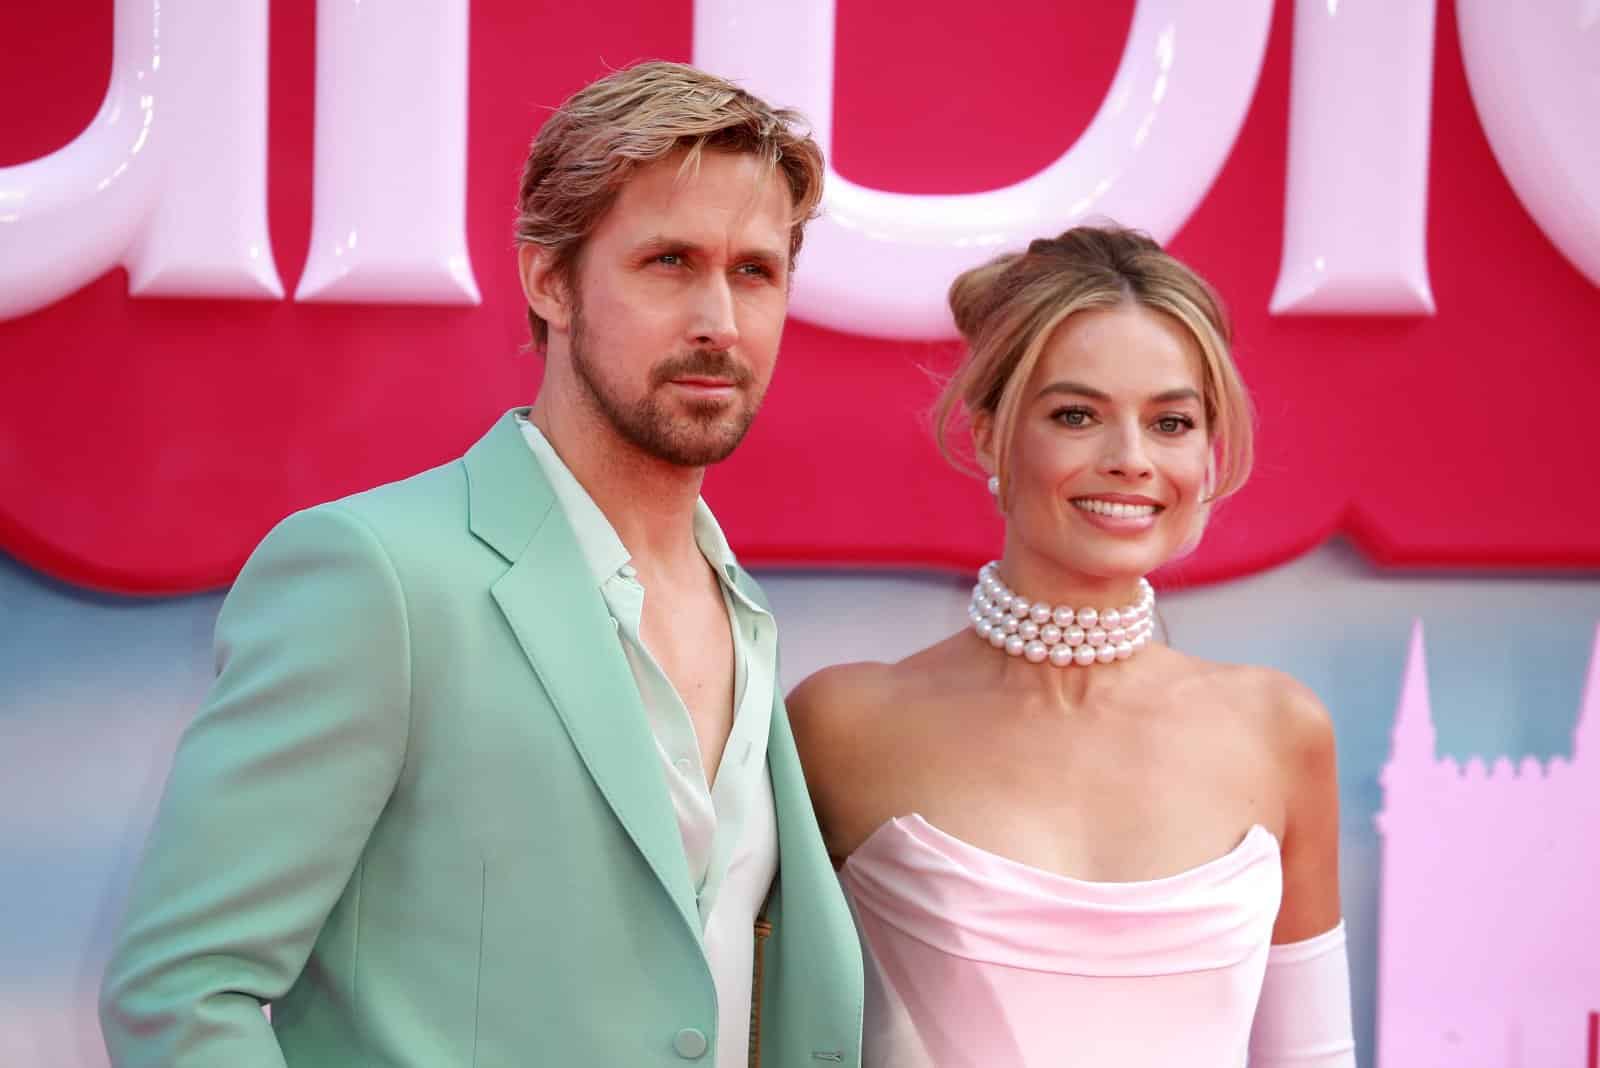 <p><span>Gosling has openly criticized Hollywood’s gender pay gap, advocating for his female co-stars and emphasizing the need for industry-wide change towards equal pay.</span></p>